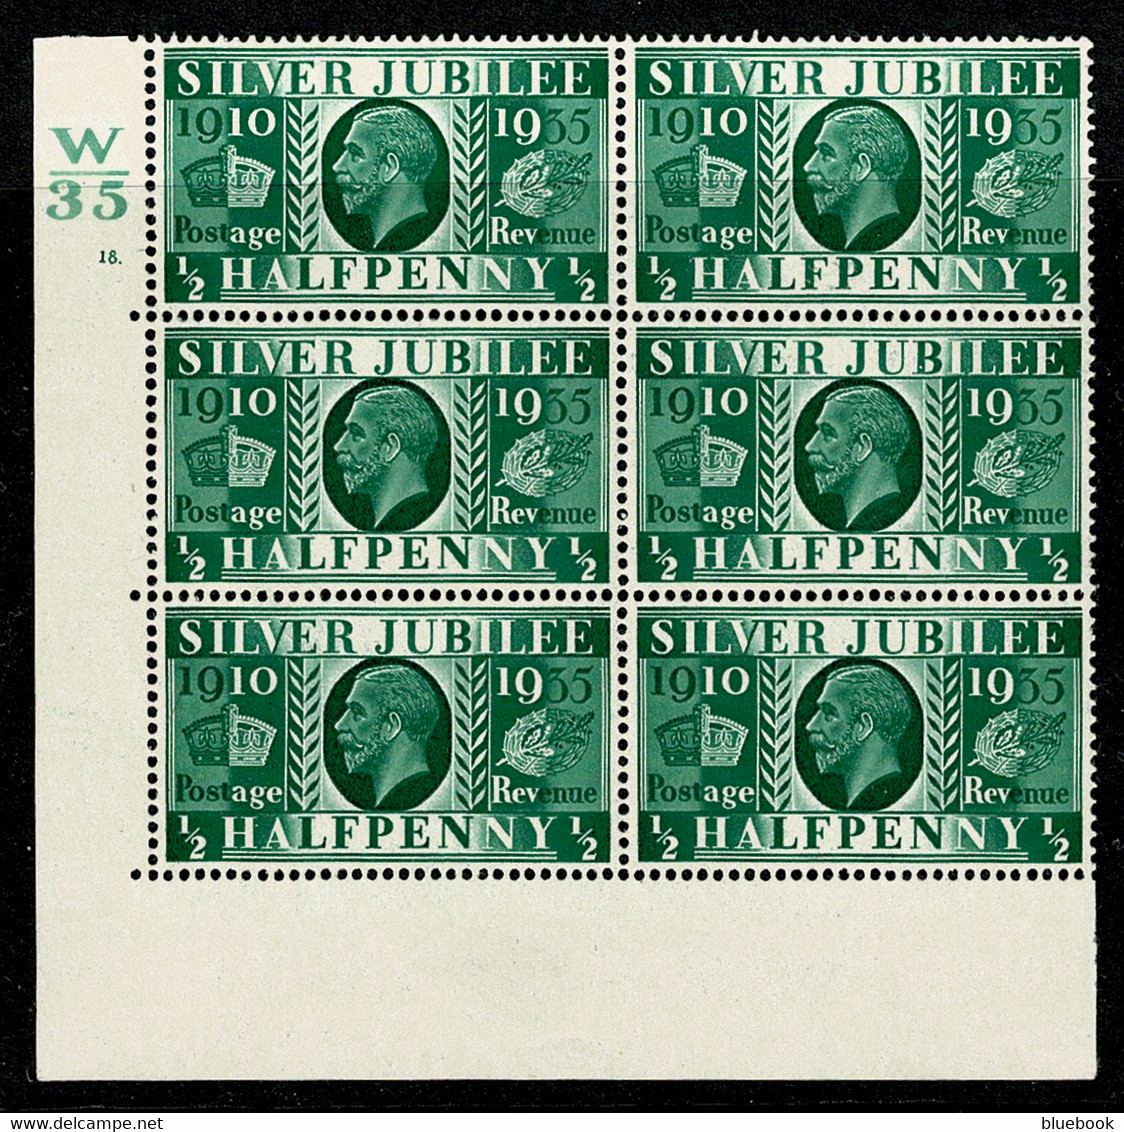 Ref 1587 - GB 1935 Silver Jubilee 1/2d Control Block (W35) Cylinder 18. Of 6 Stamps MNH/MM - Unused Stamps